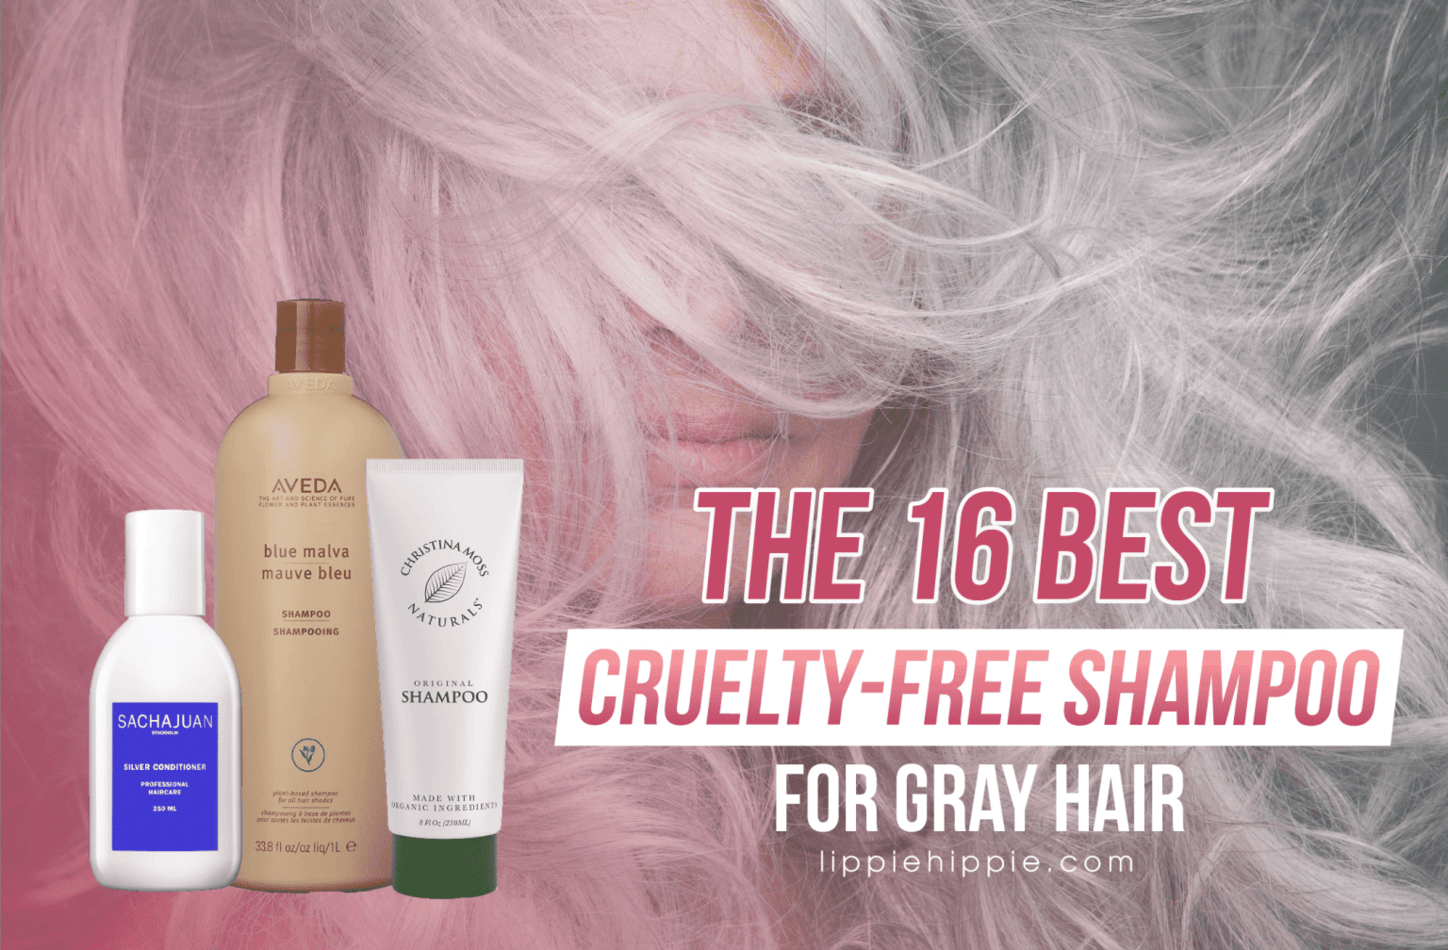 The 16 Best Cruelty Free Shampoos For Gray Hair [2022 Reviews]